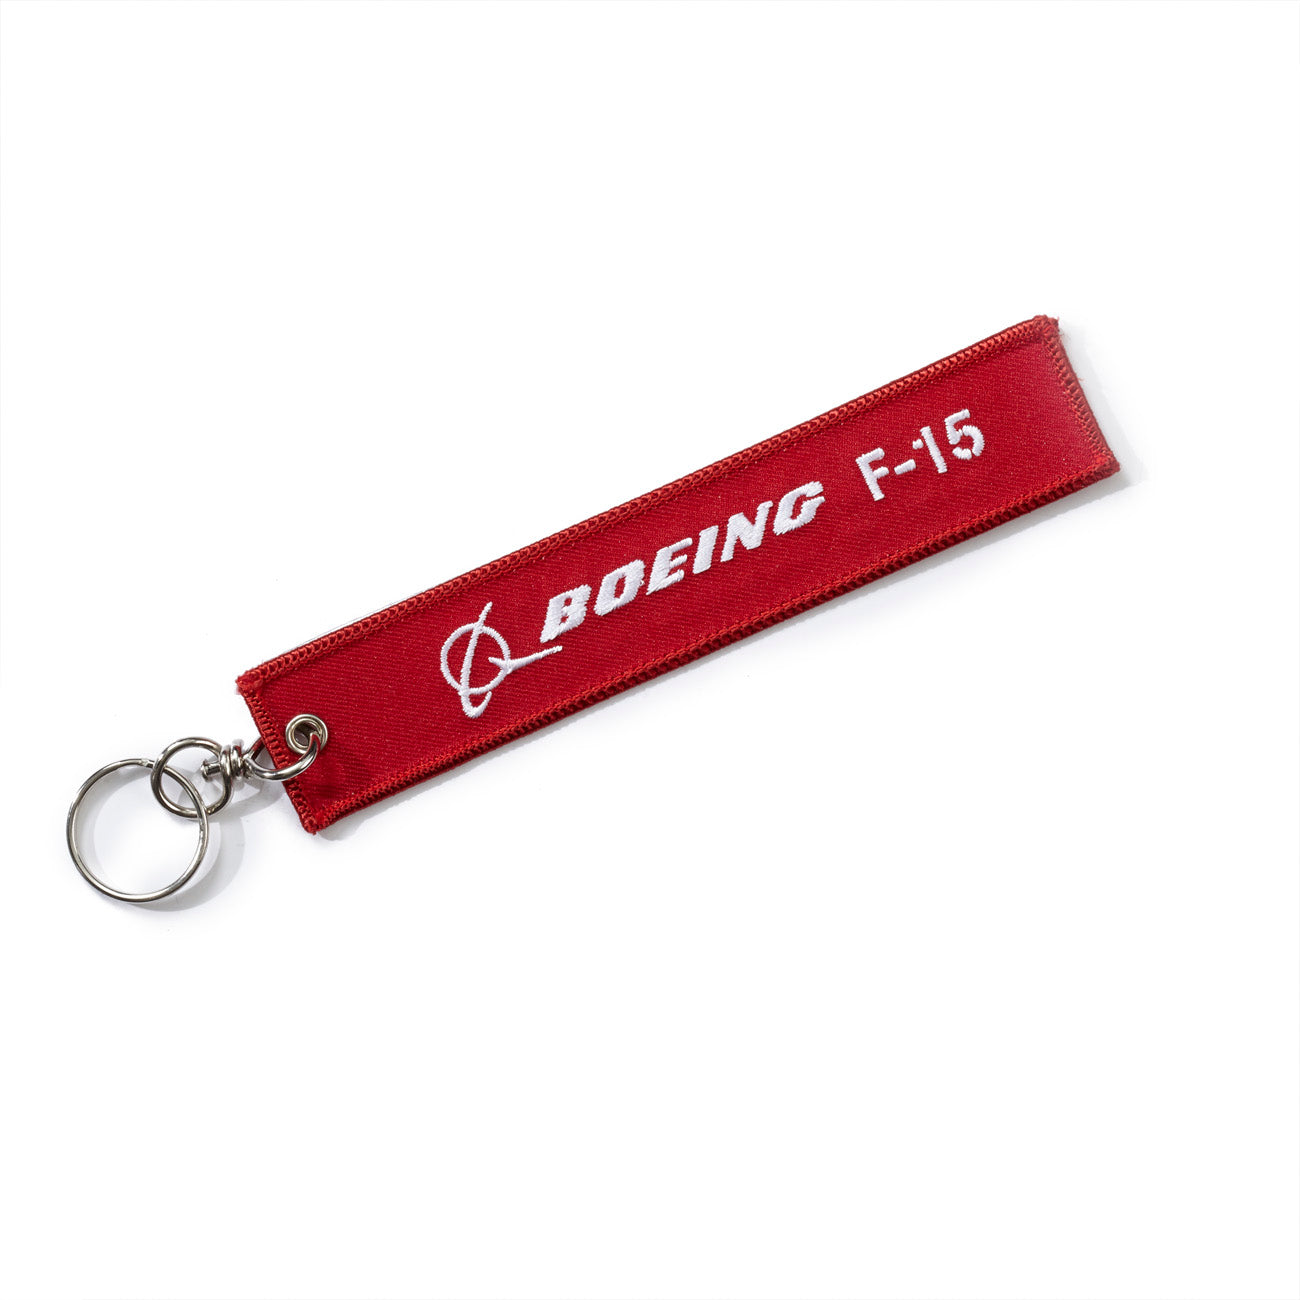 Buy F-15 Remove Before Flight Key Chain Luggage Baggage Tag Online in India  